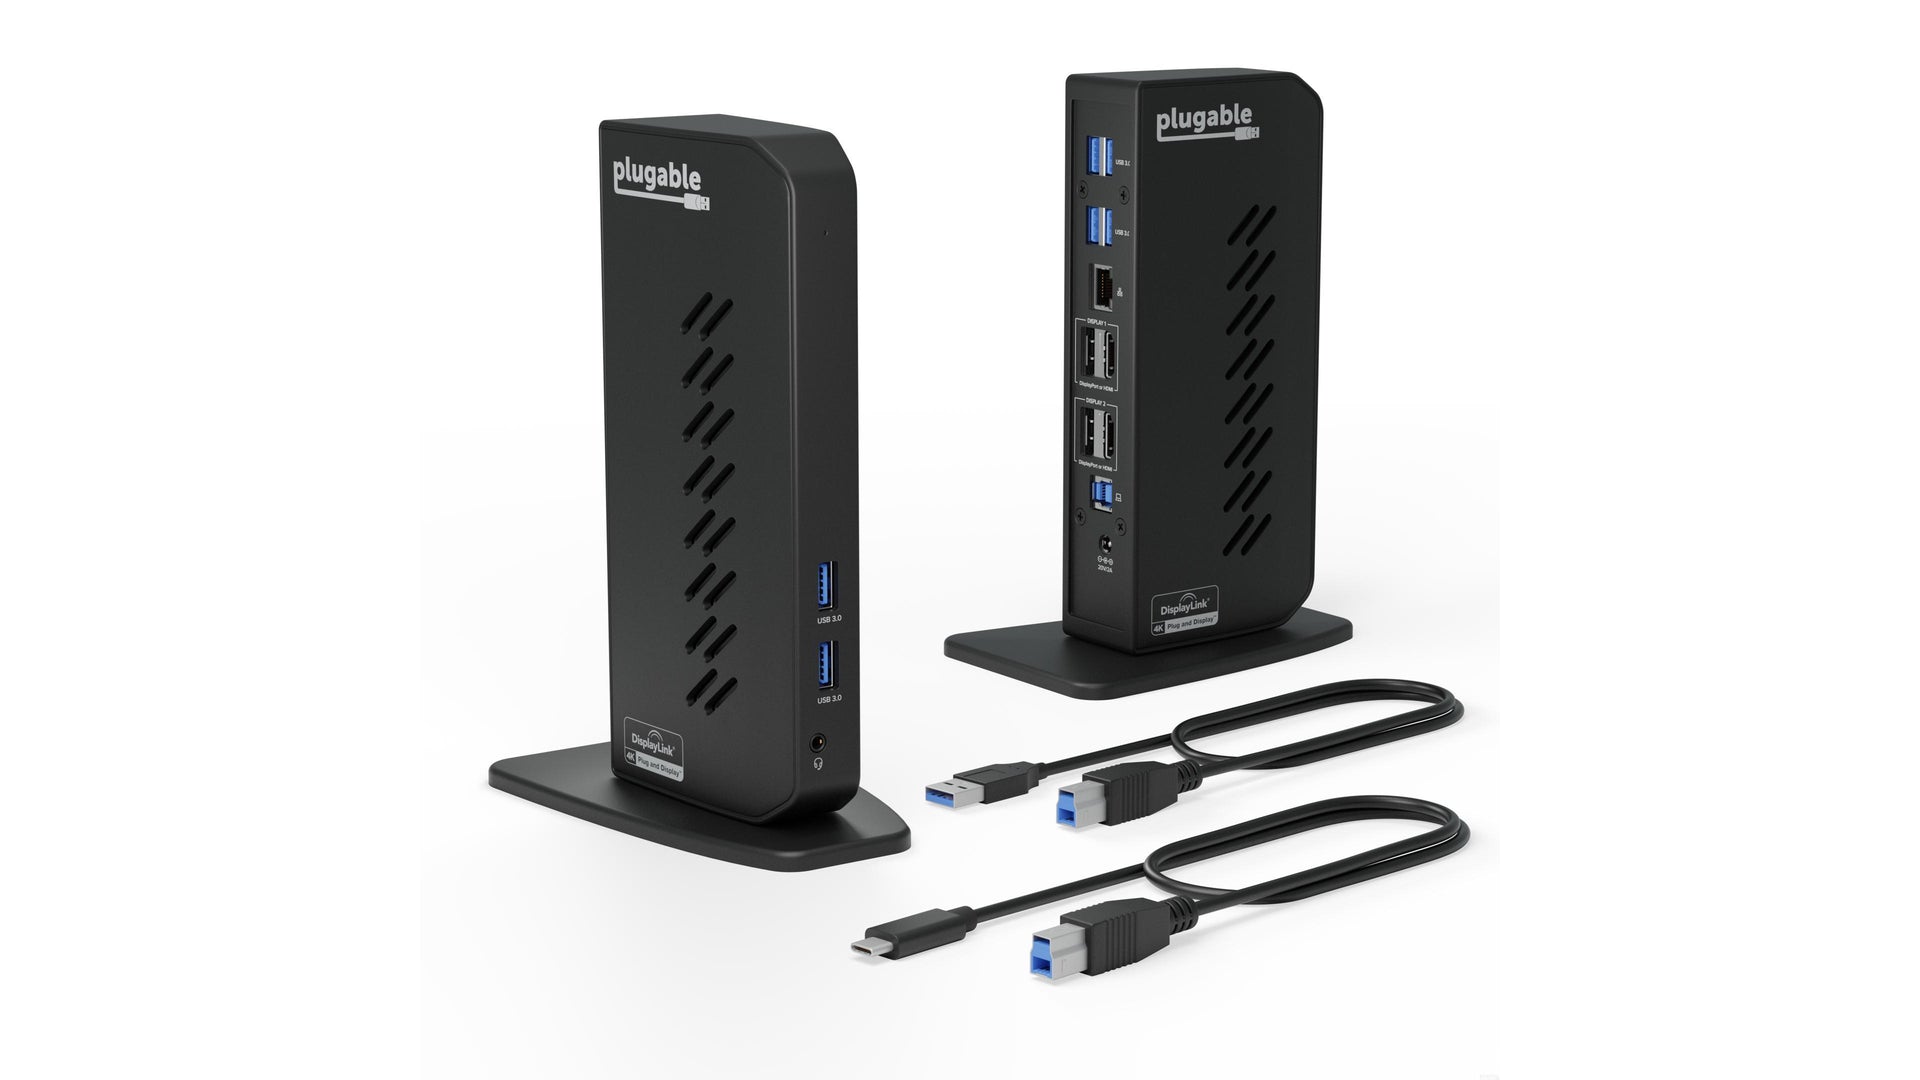 Plugable USB 3.1 Gen 2 10Gbps SATA Upright Hard Drive Dock and SSD Dock -  includes both USB-C and USB 3.0 cables, supports 10TB+ drives 